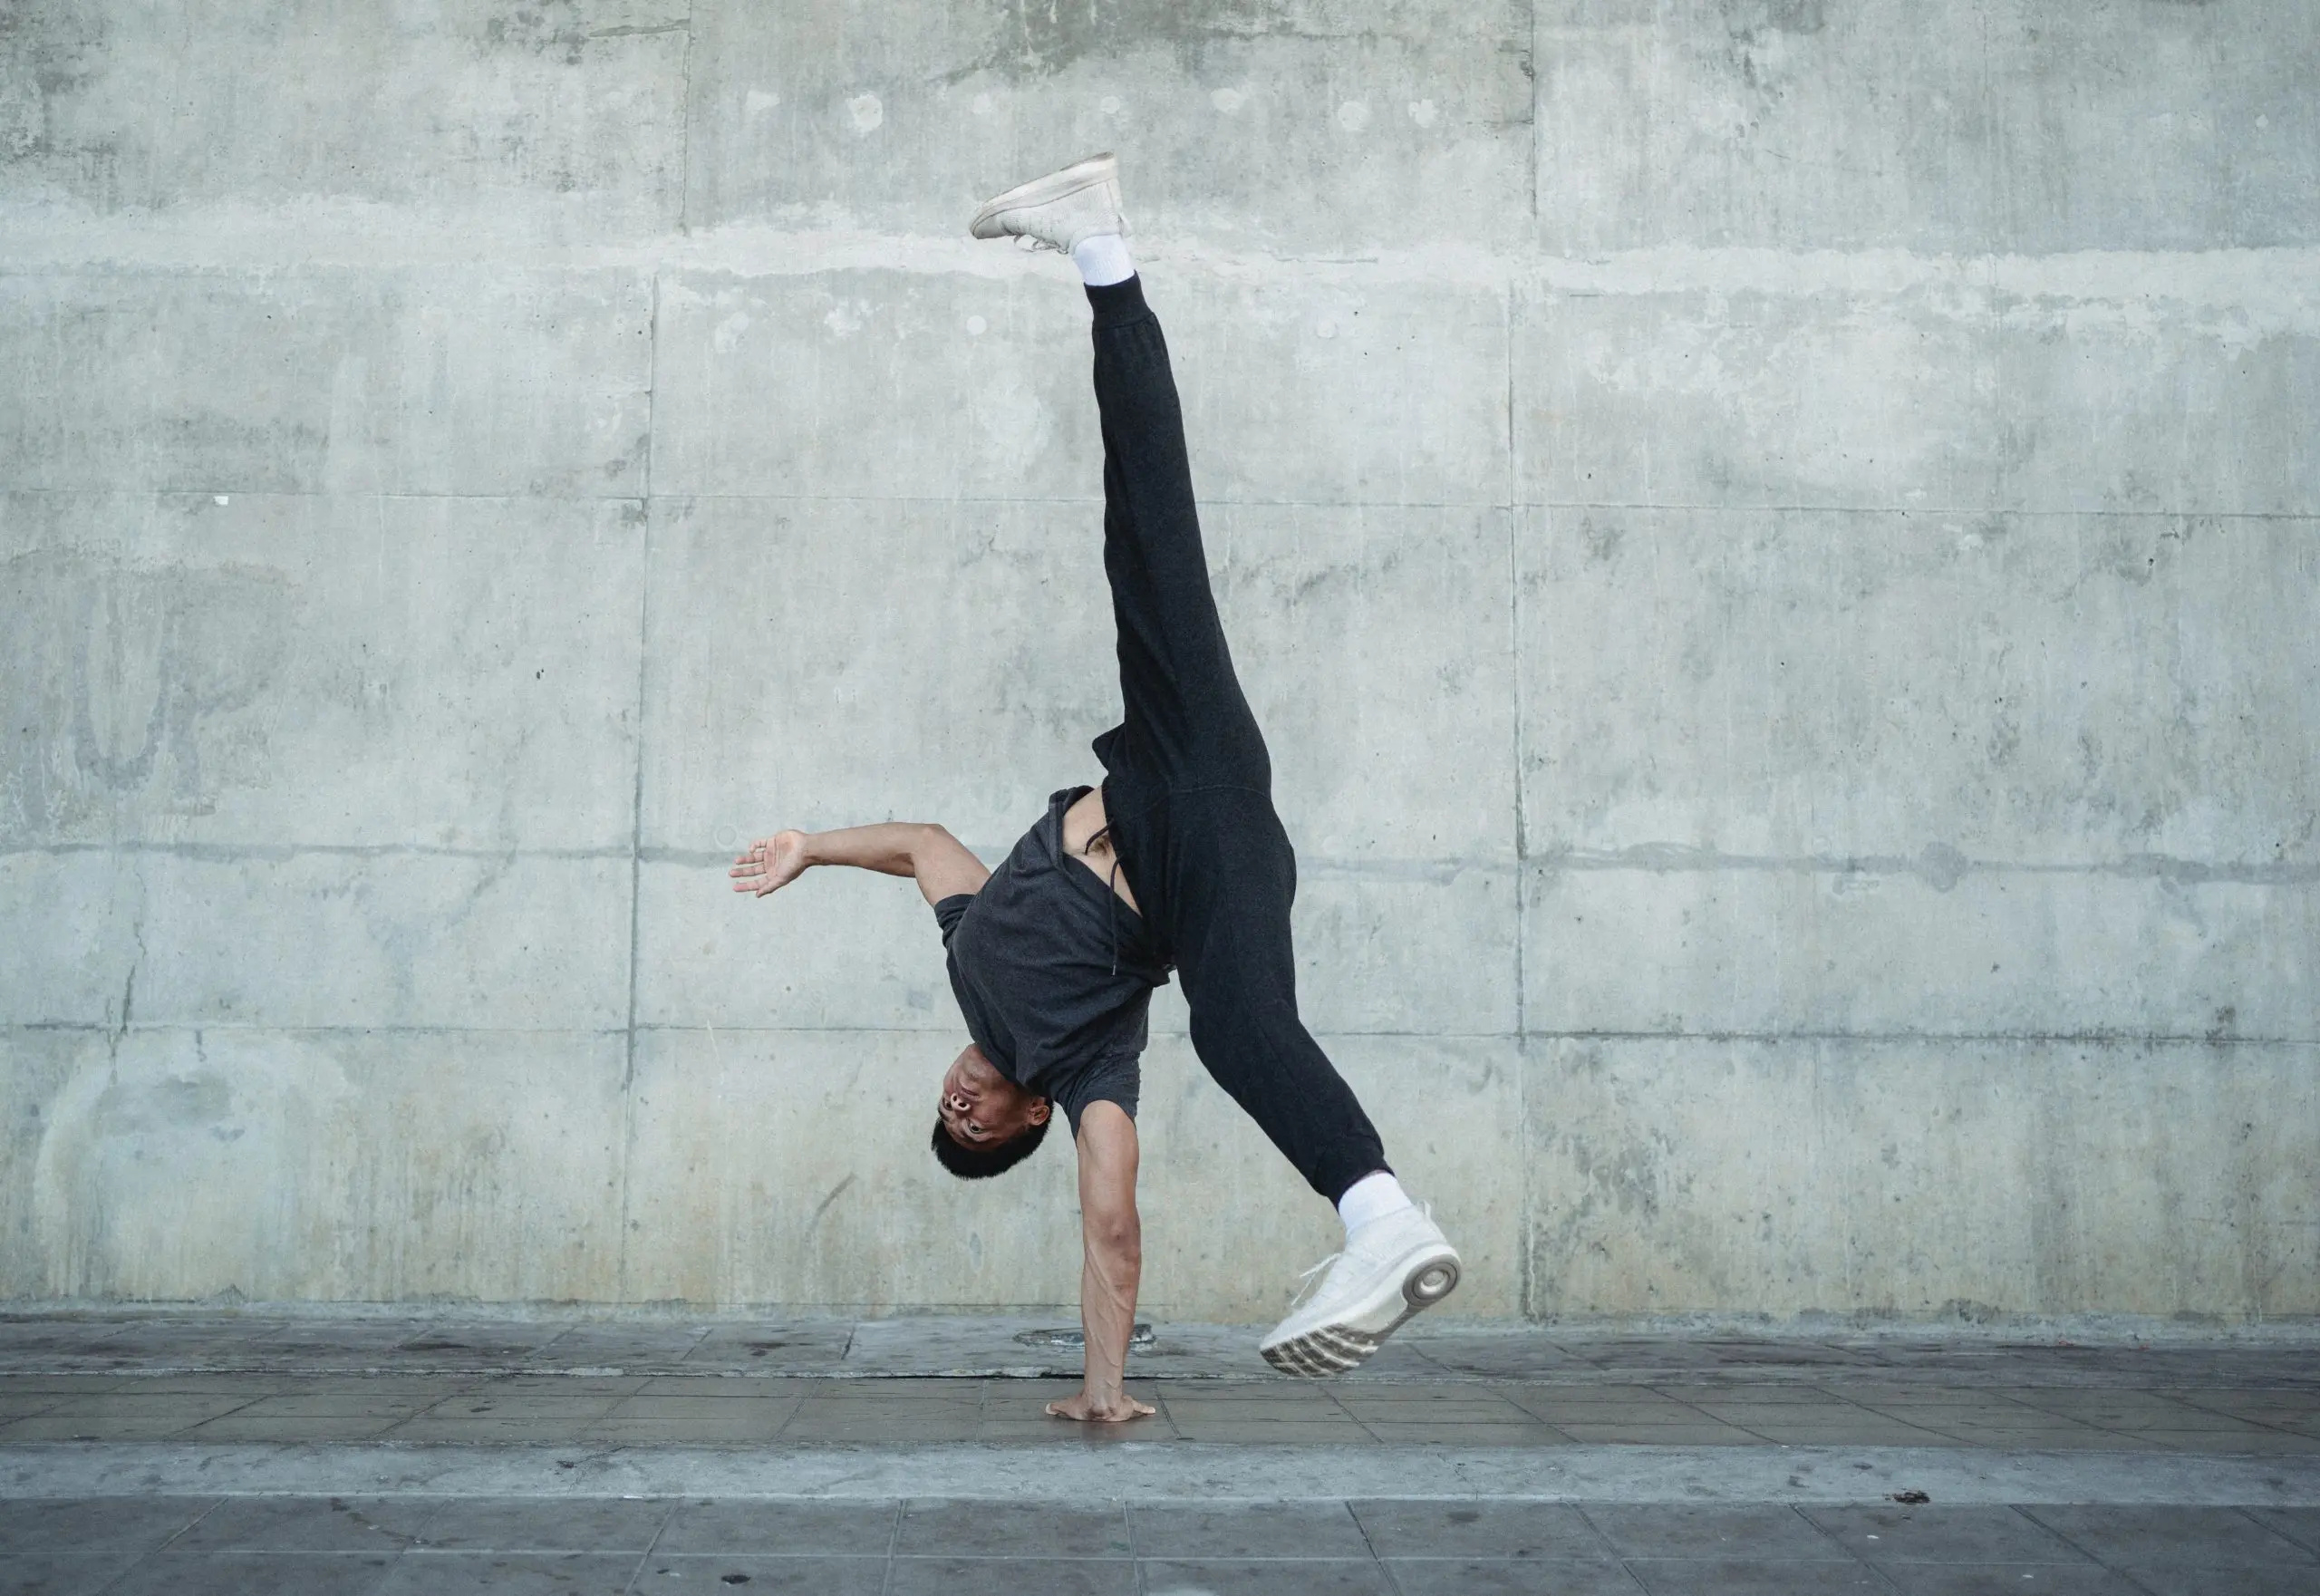 Breakdancing: Breakdancing to Debut as a New Sport in 2024 Olympics, Street dance. 2560x1770 HD Background.